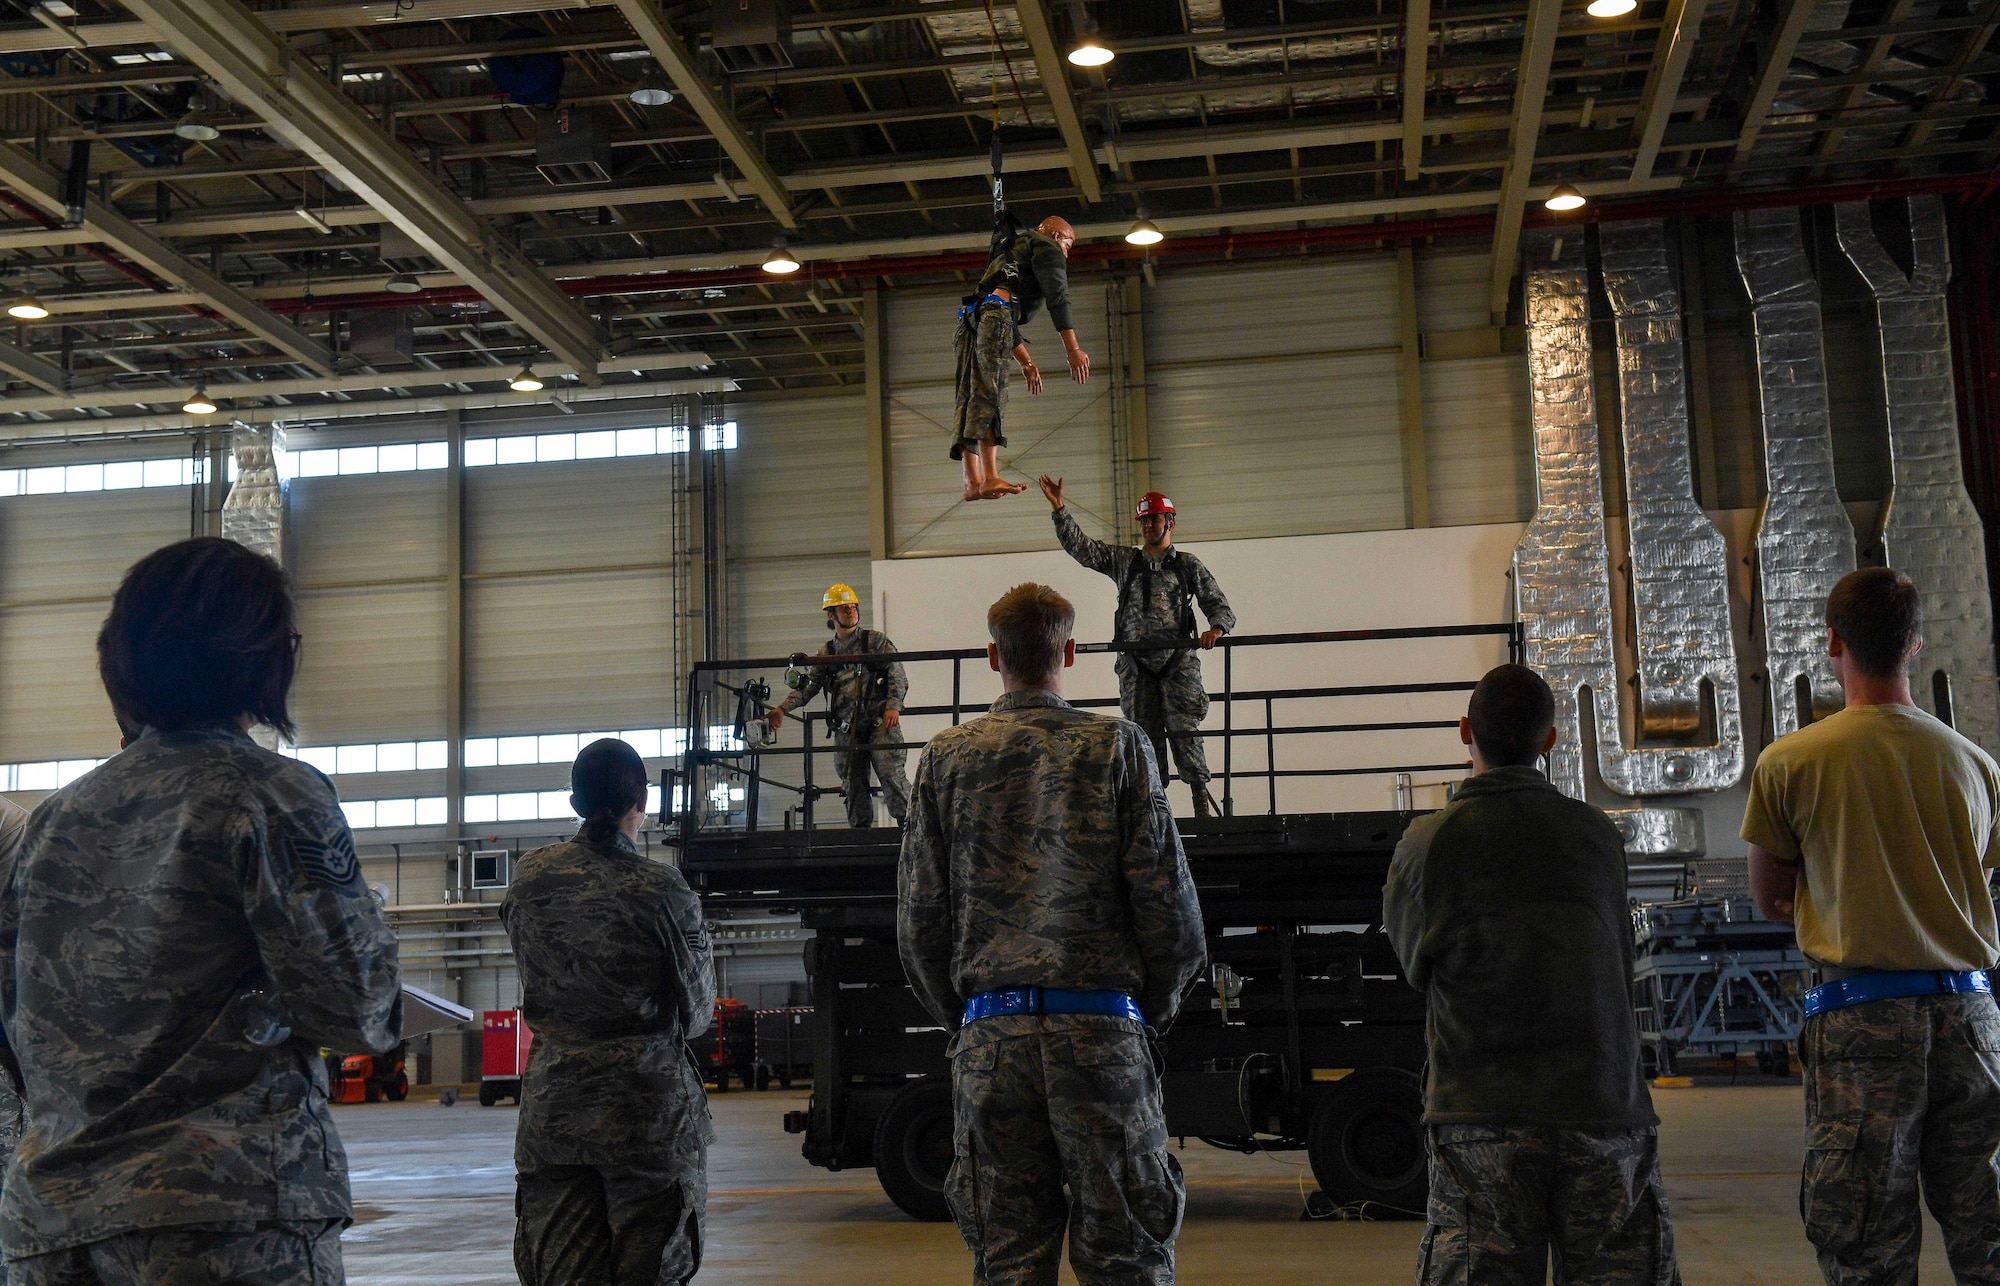 Airmen assigned to the 721st Aircraft Maintenance Squadron participate in fall protection training on Ramstein Air Base, Germany, May 10, 2017. The training was conducted as part of the Occupational Safety and Health Administration's National Fall Prevention Stand-Down, which encourages employers to train their employees on fall hazards and the importance of fall protection. (U.S. Air Force photo by Senior Airman Tryphena Mayhugh)